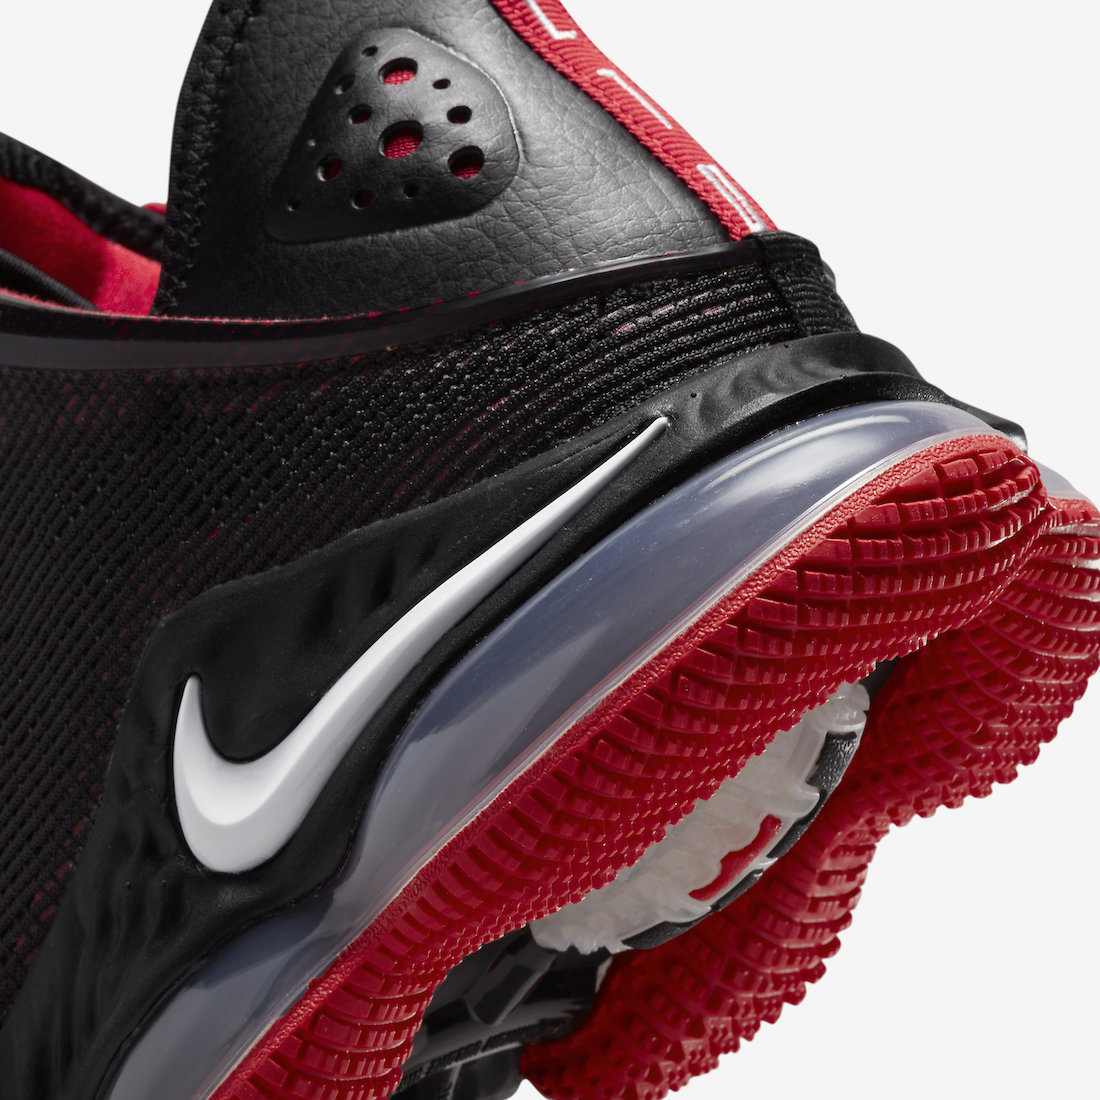 Nike-LeBron-19-Low-Bred-DH1270-001-Release-Date-7